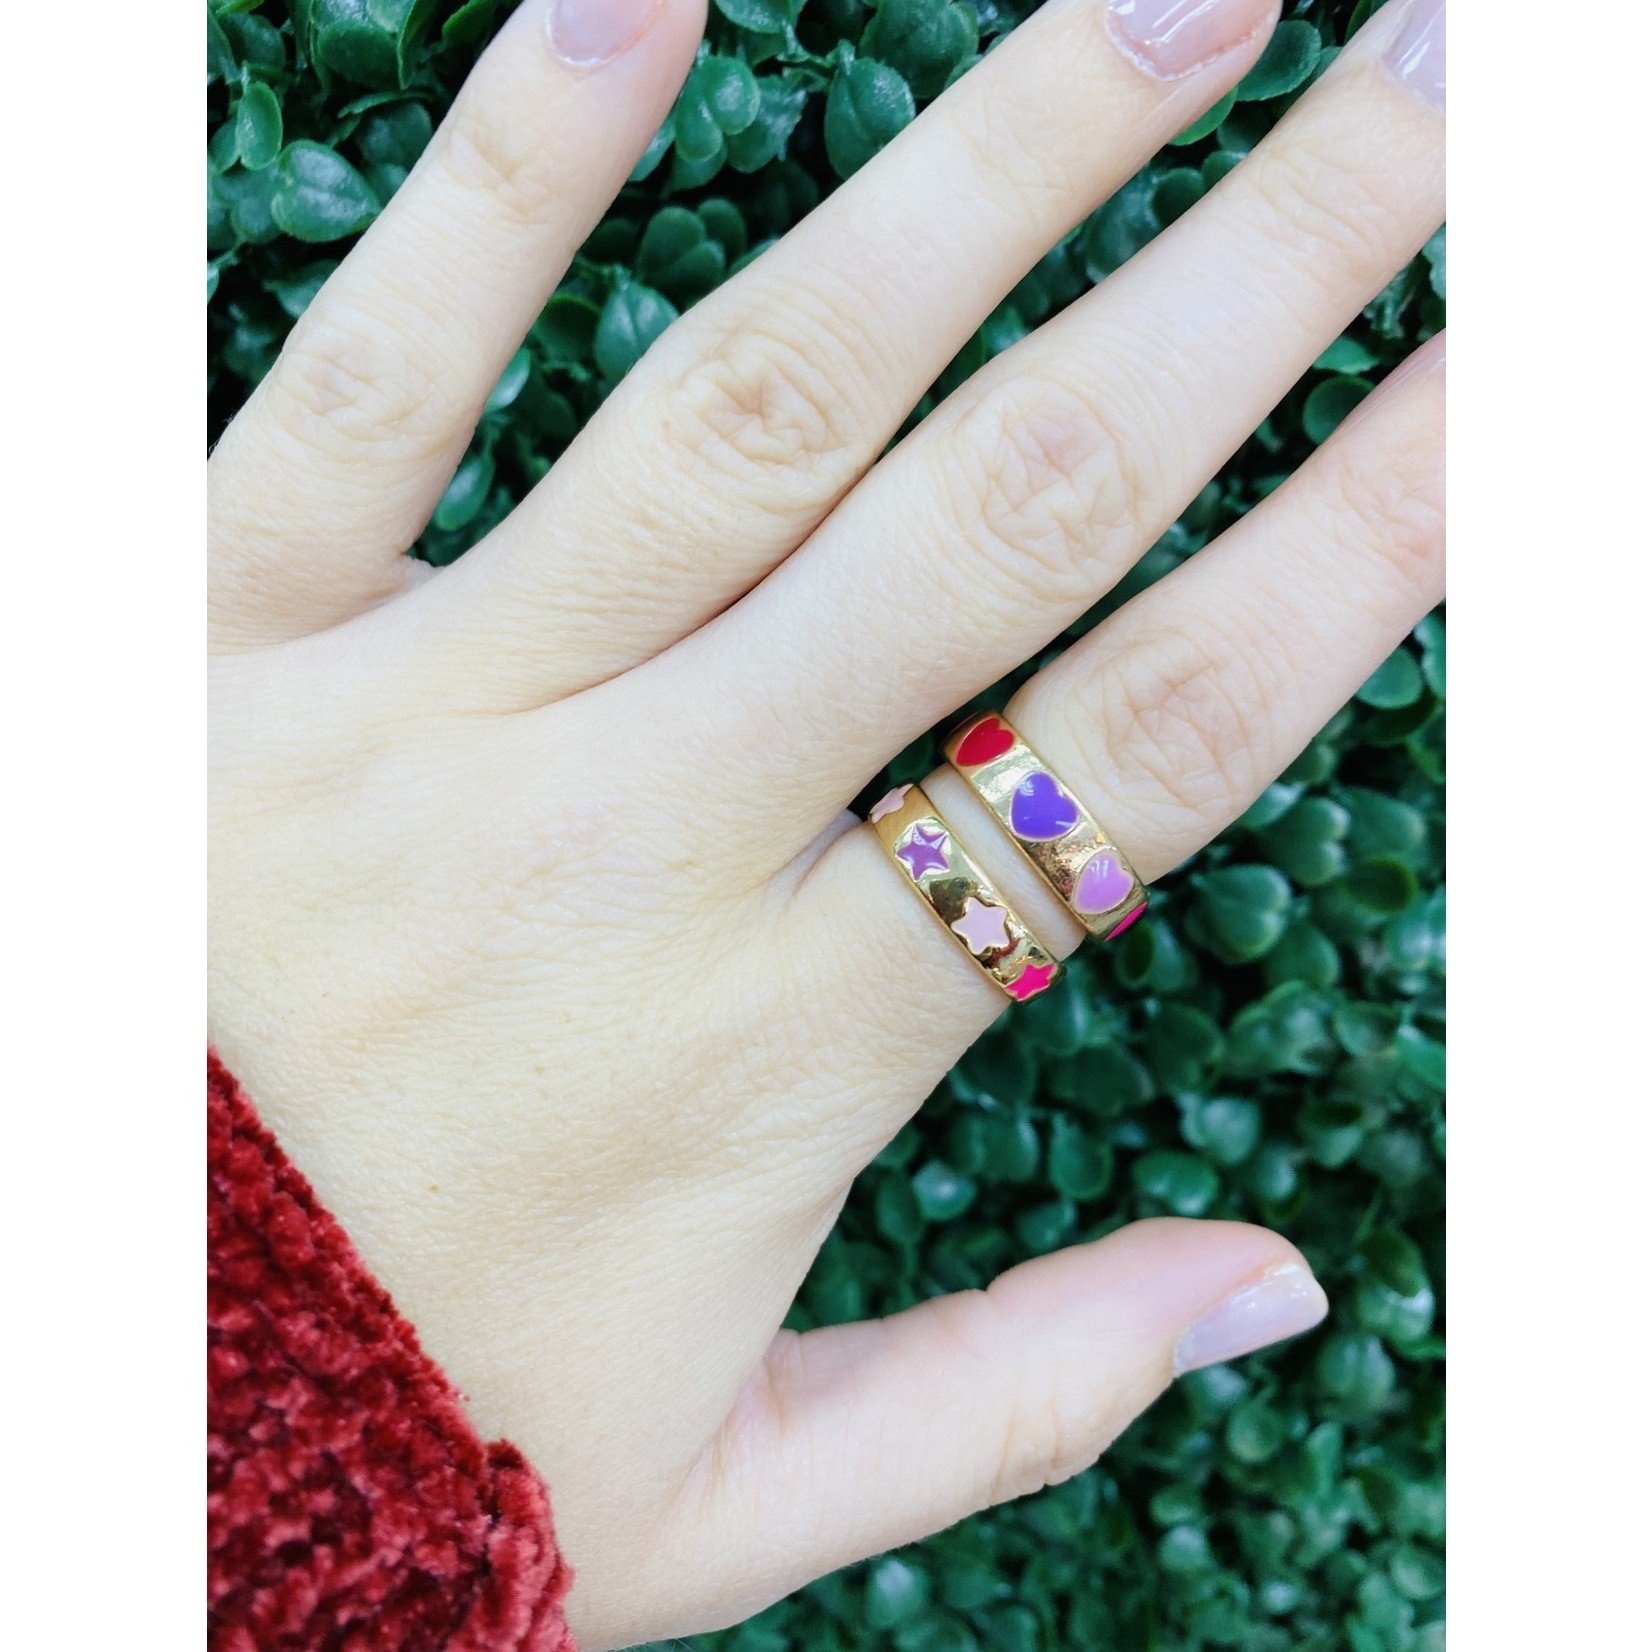 Lauren Kenzie 14 K Gold Plated Colorful Ring